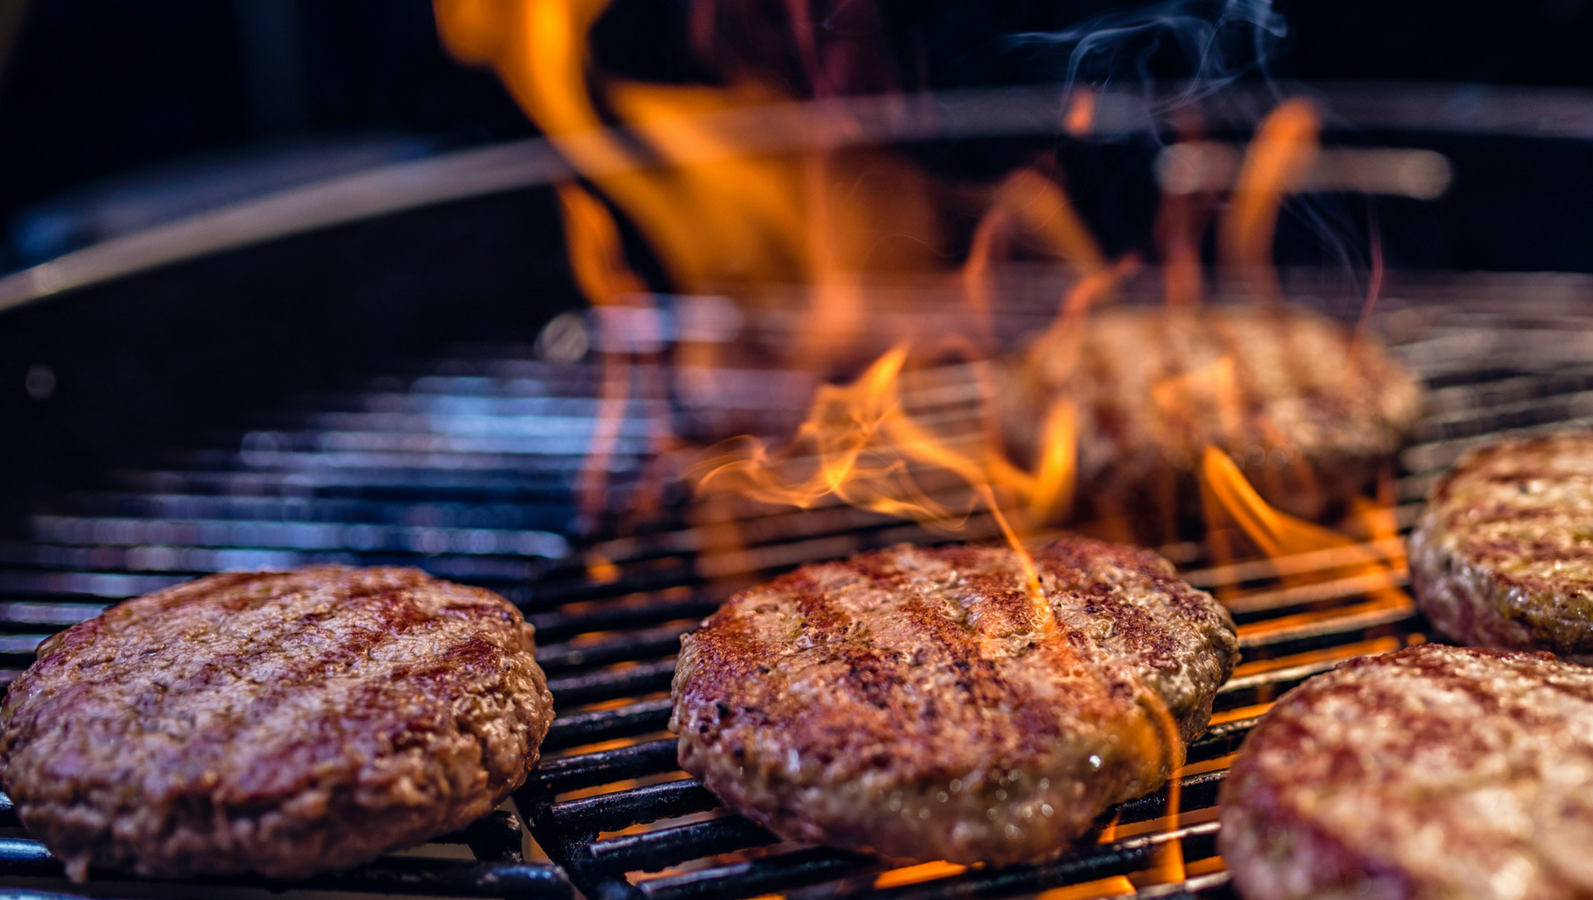 How to grill burgers properly: Doing it wrong could actually kill you